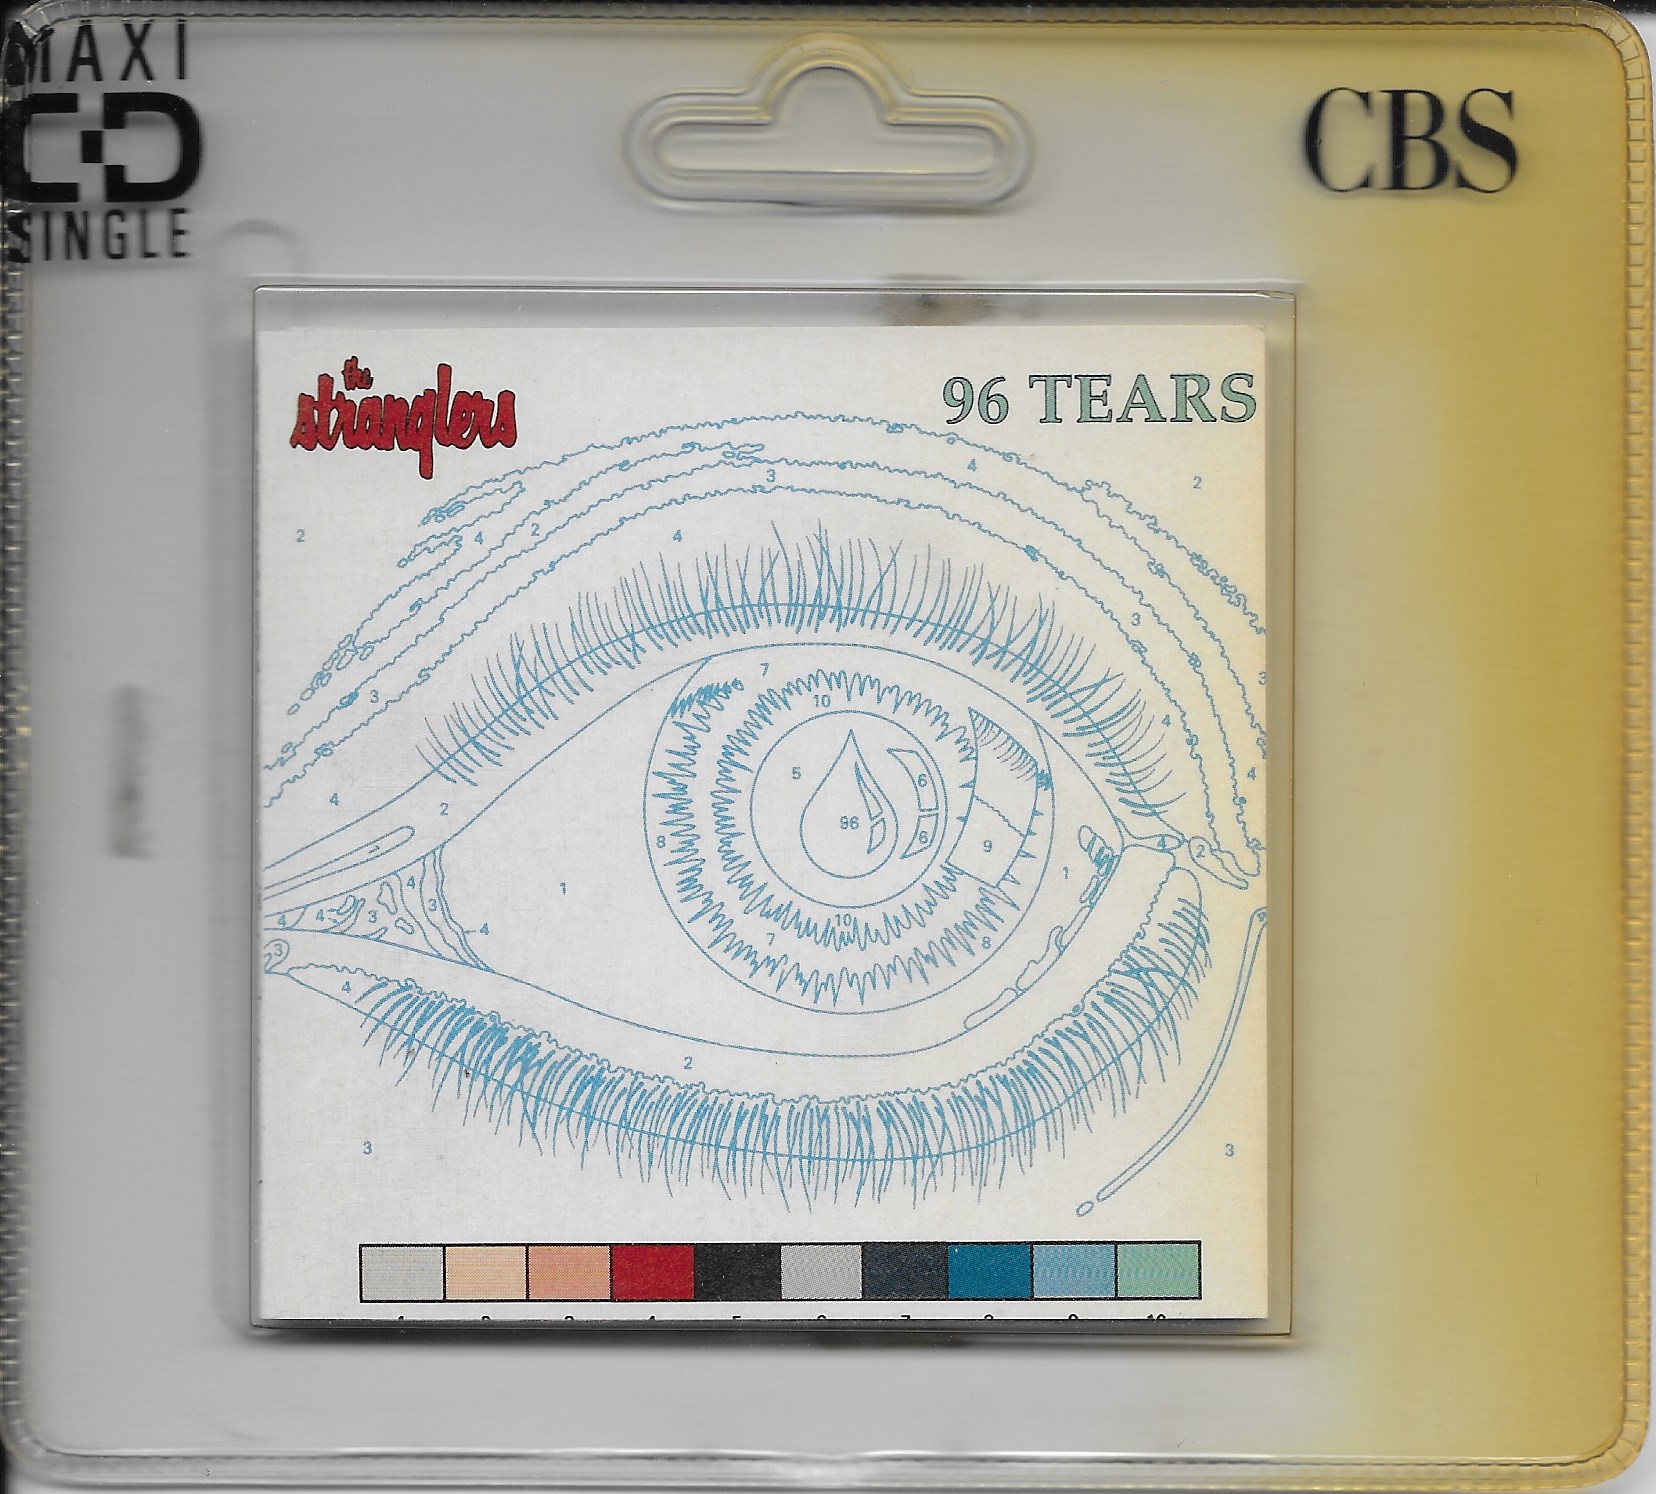 Picture of 96 tears by artist The Stranglers  from The Stranglers cdsingles